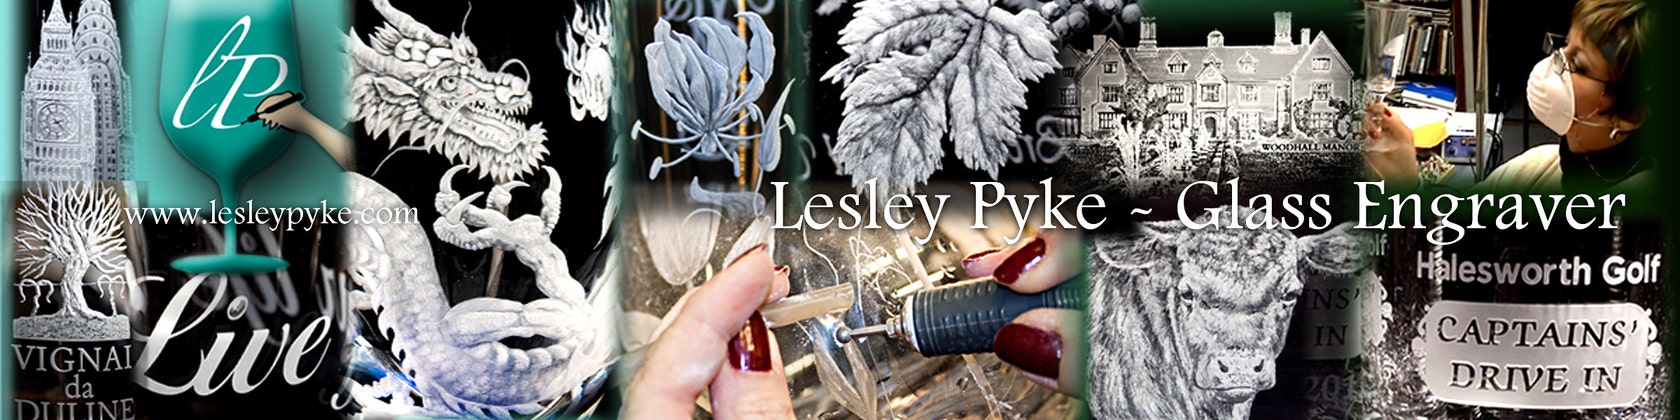 Lesley Pyke Glass Engraver, creating Glass Engraving lessons / Engraved  glass tuition / glas